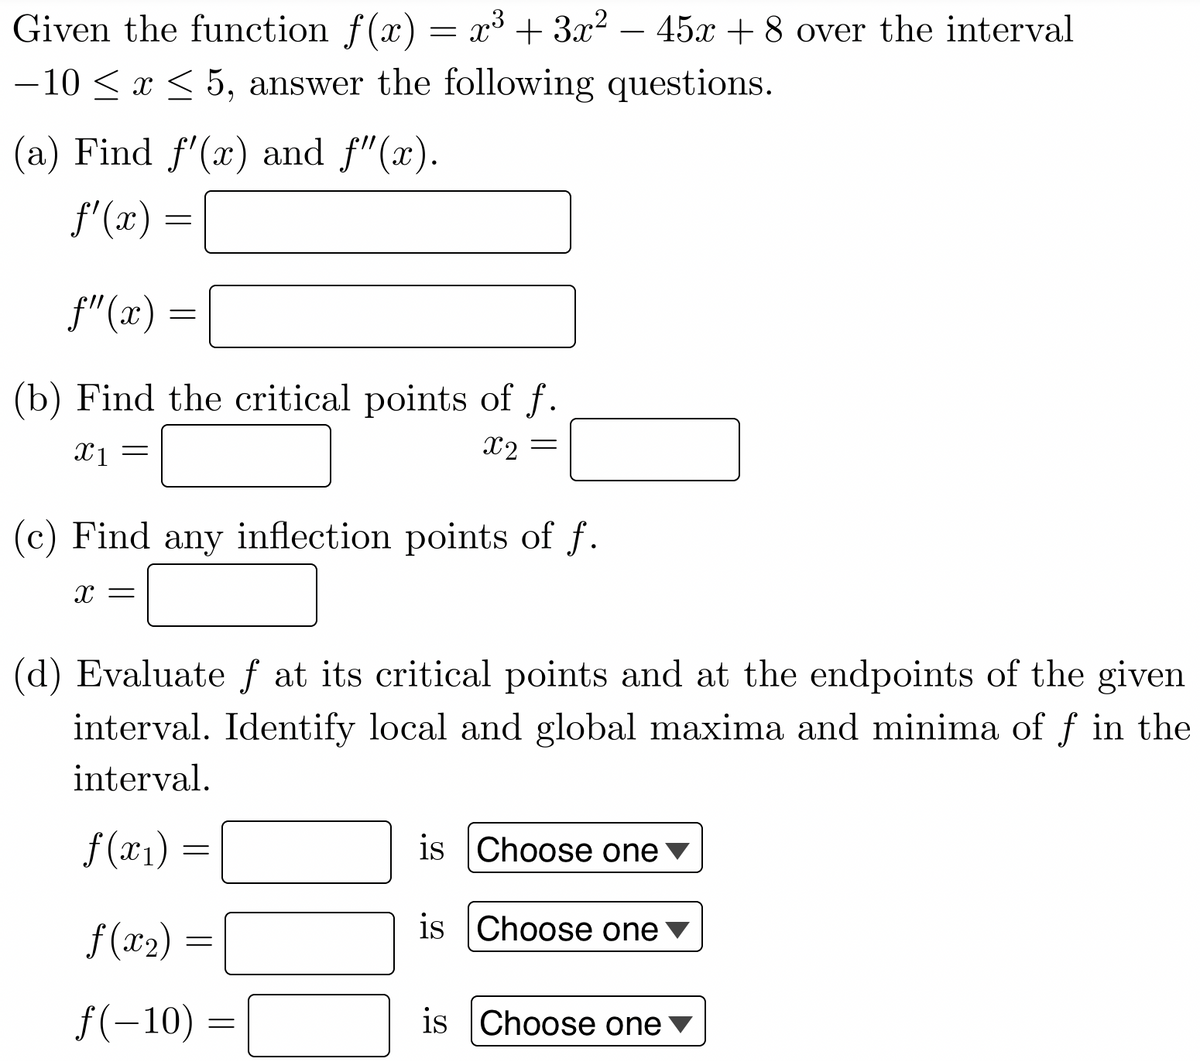 Given the function f(x) = x³ + 3x² - 45x + 8 over the interval
-10 ≤ x ≤ 5, answer the following questions.
(a) Find f'(x) and f"(x).
f'(x) =
f"(x)
(b) Find the critical points of f.
x2 =
X1
=
-
=
(c) Find any inflection points of f.
X =
(d) Evaluate f at its critical points and at the endpoints of the given
interval. Identify local and global maxima and minima of f in the
interval.
f(x₁) =
f(x₂) =
ƒ(-10) =
is Choose one
is Choose one
is Choose one